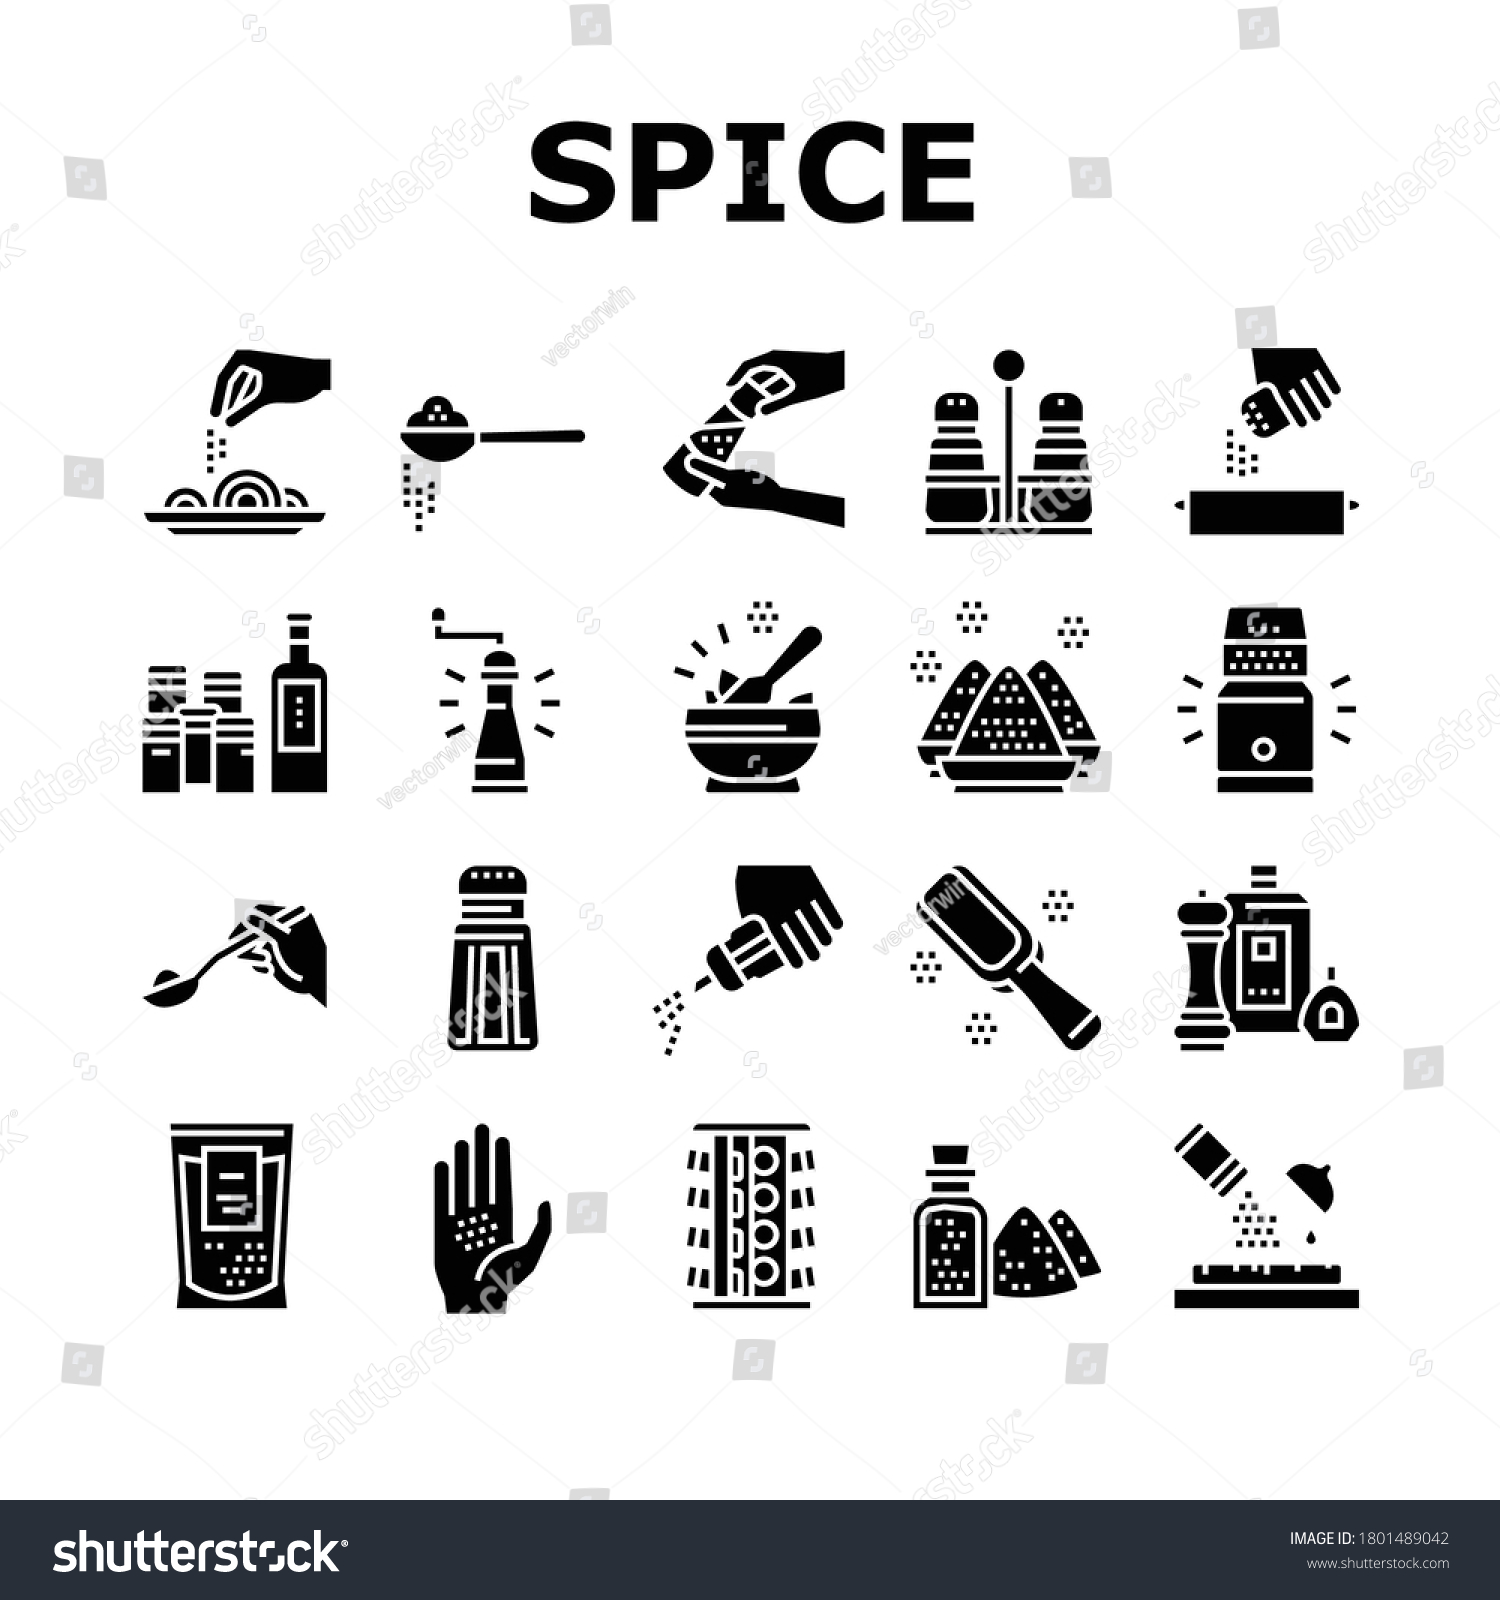 Spice Condiment Herb Collection Icons Set Vector. Salt And Pepper For Flavoring Meal In Kitchen Utensil. Spice On Spoon And Palm Glyph Pictograms Black Illustrations #1801489042